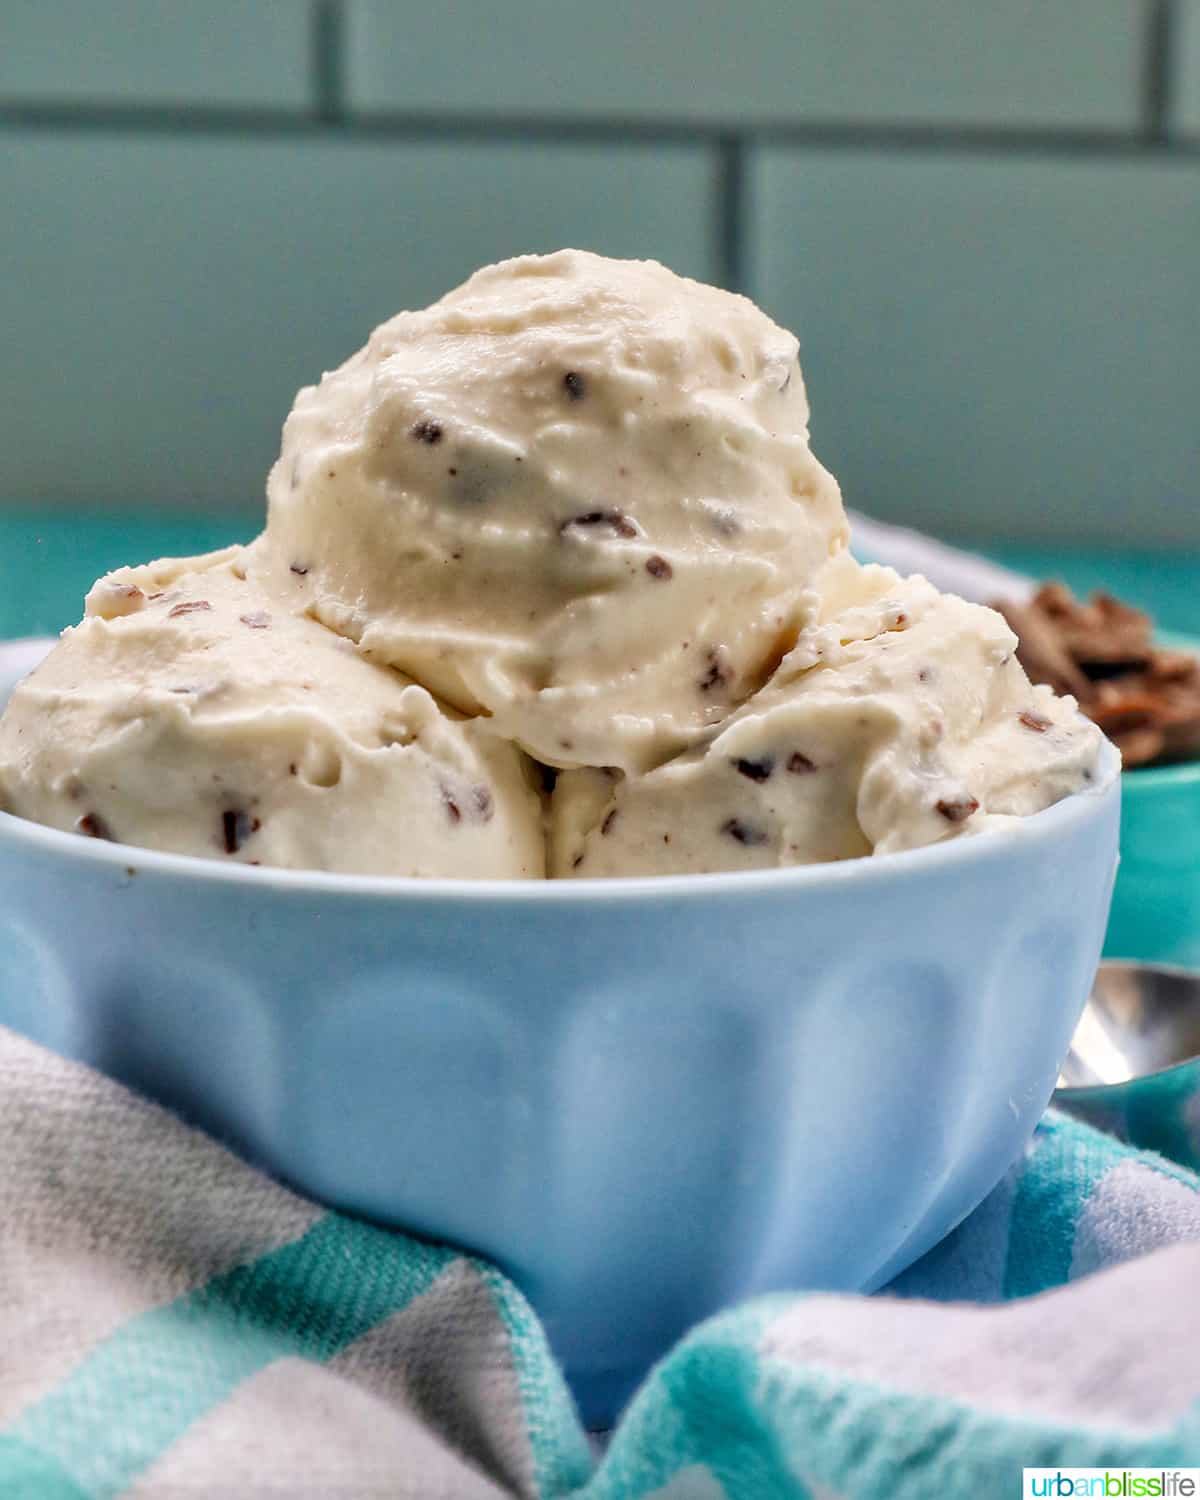 bowl of stracciatella ice cream scoops with bowl of chocolate shavings on the side.